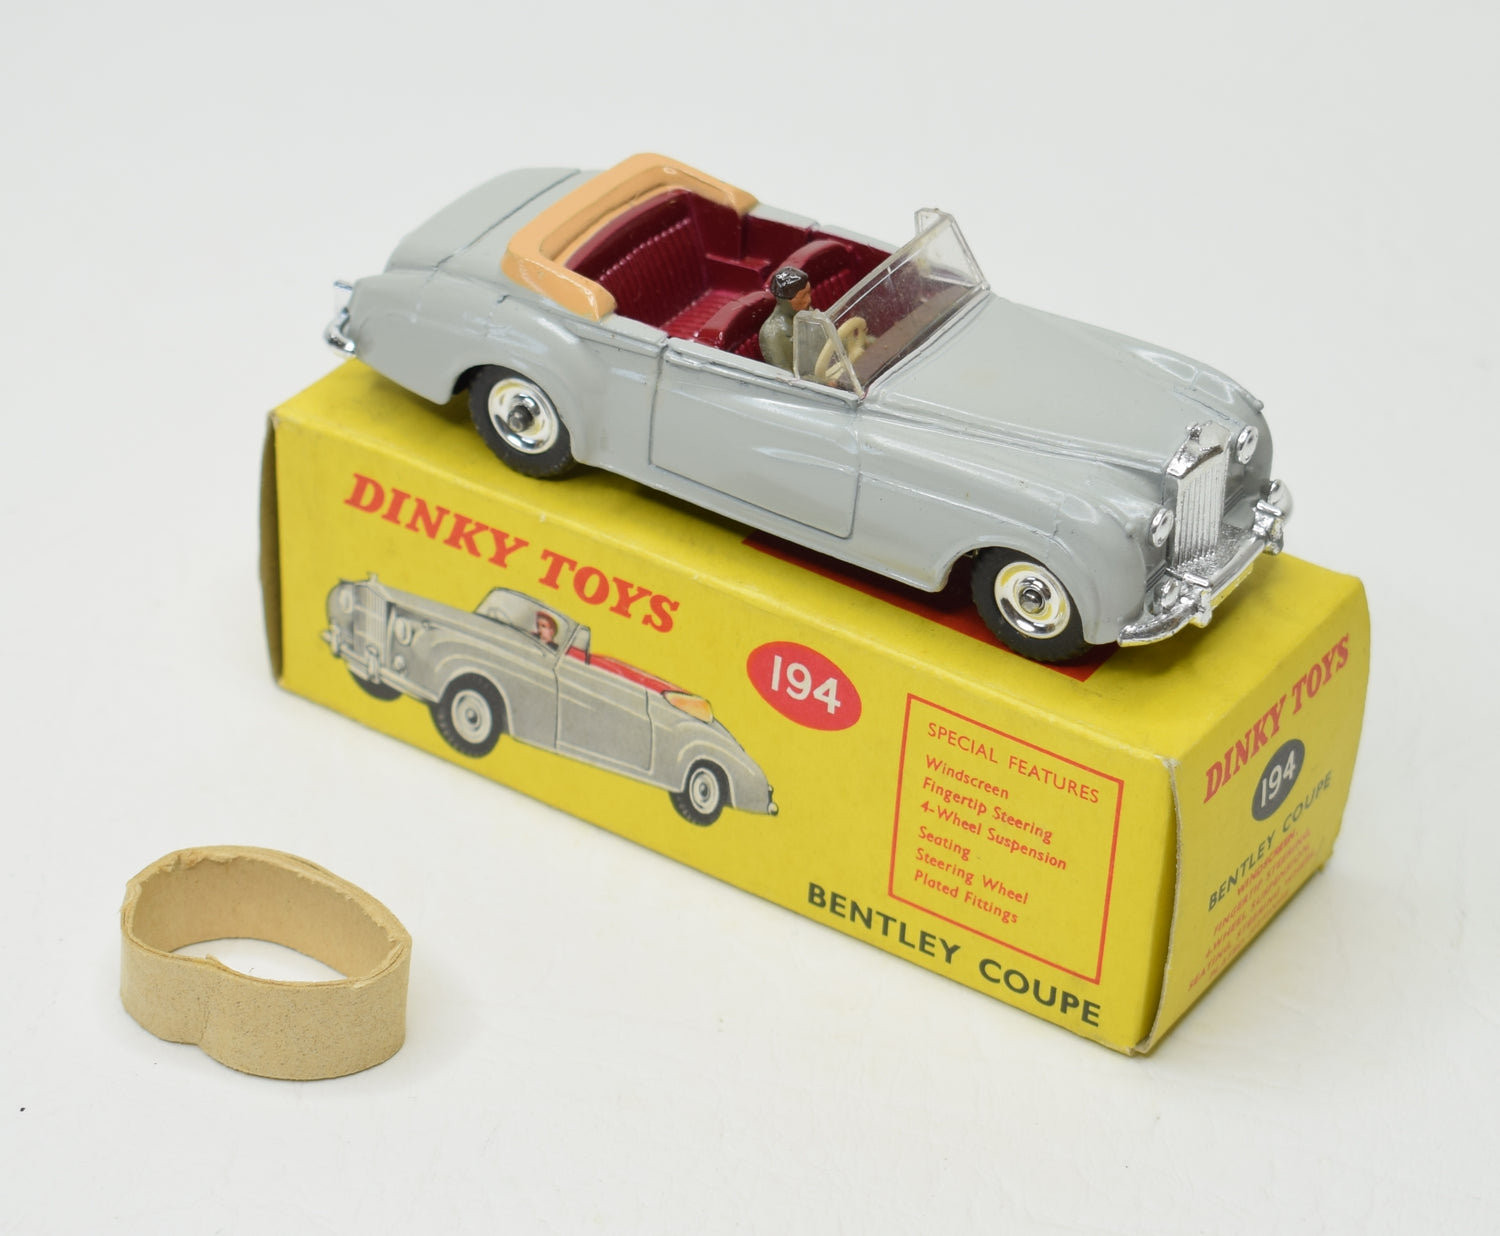 Dinky Toys 194 Bentley Coupe Virtually Mint/Boxed